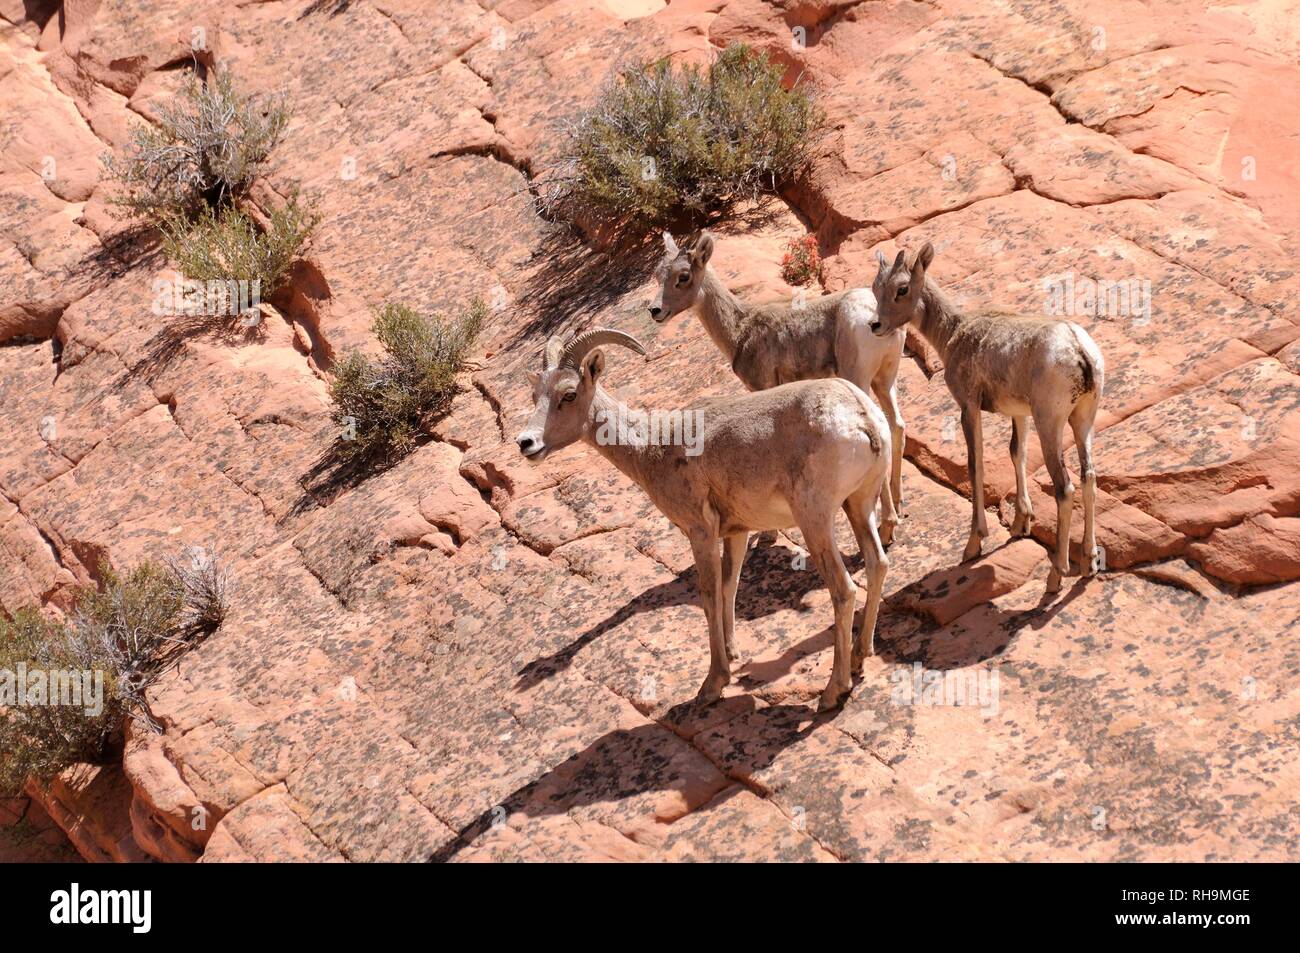 Desert Bighorn Sheep (Ovis canadensis nelsoni), female with two young on sandstone rocks, Zion National Park, Utah Stock Photo